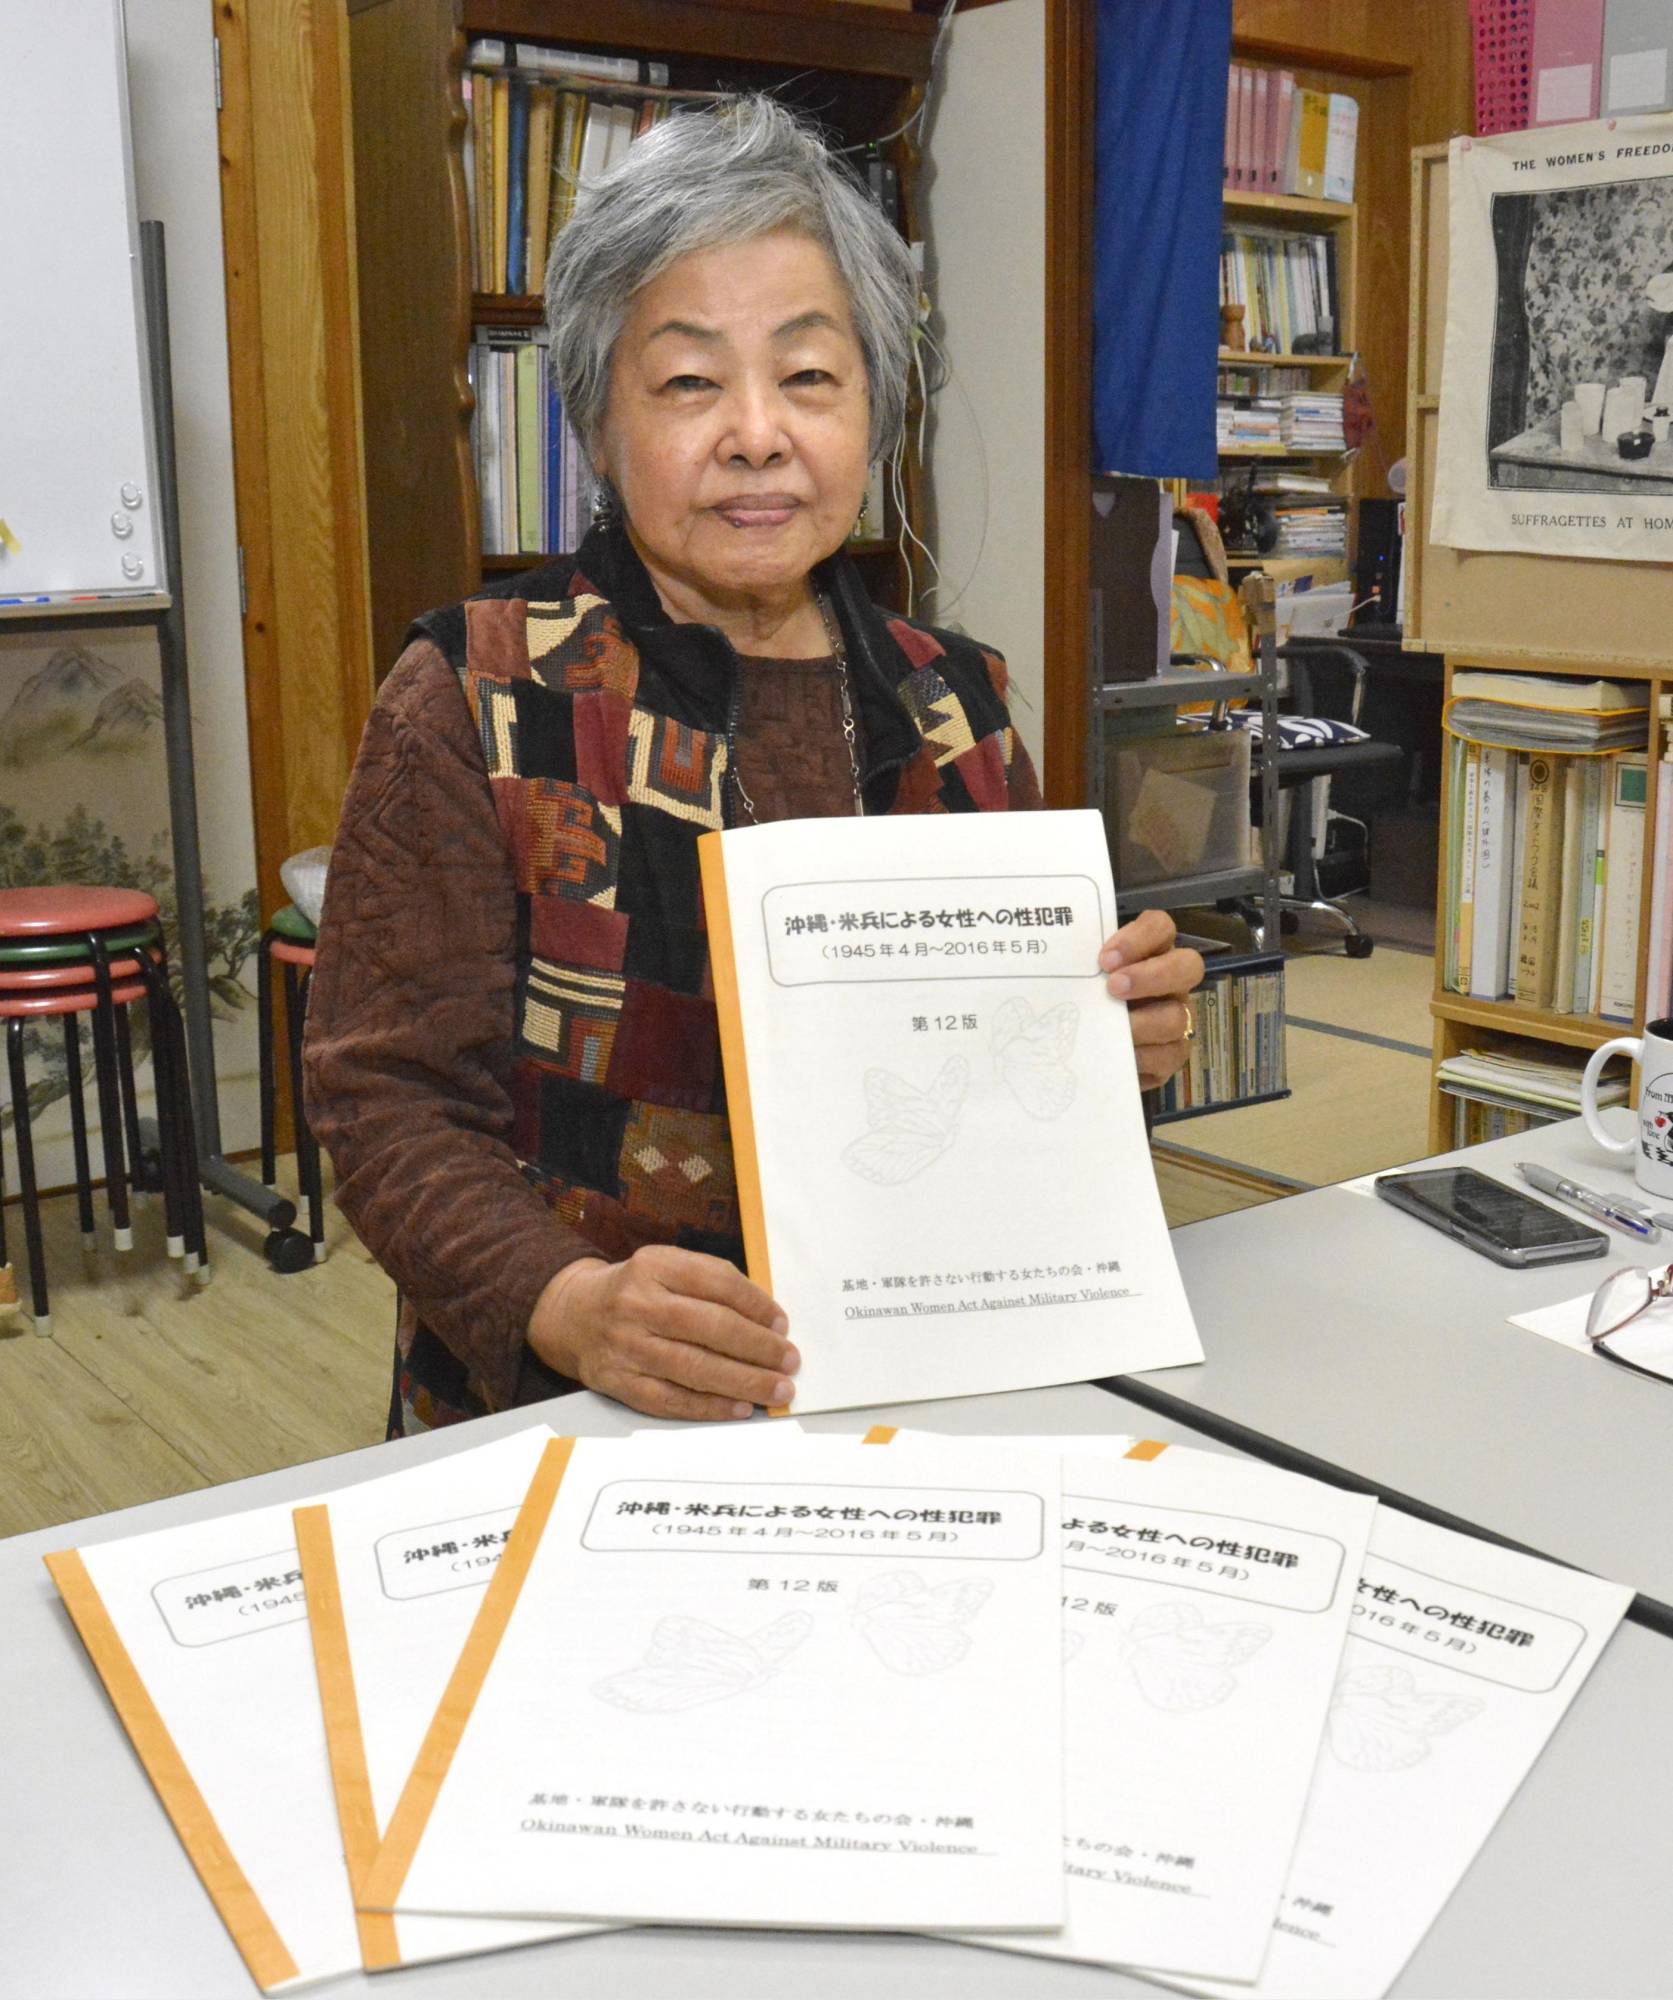 Okinawan womens civic group chronicles sex crimes by